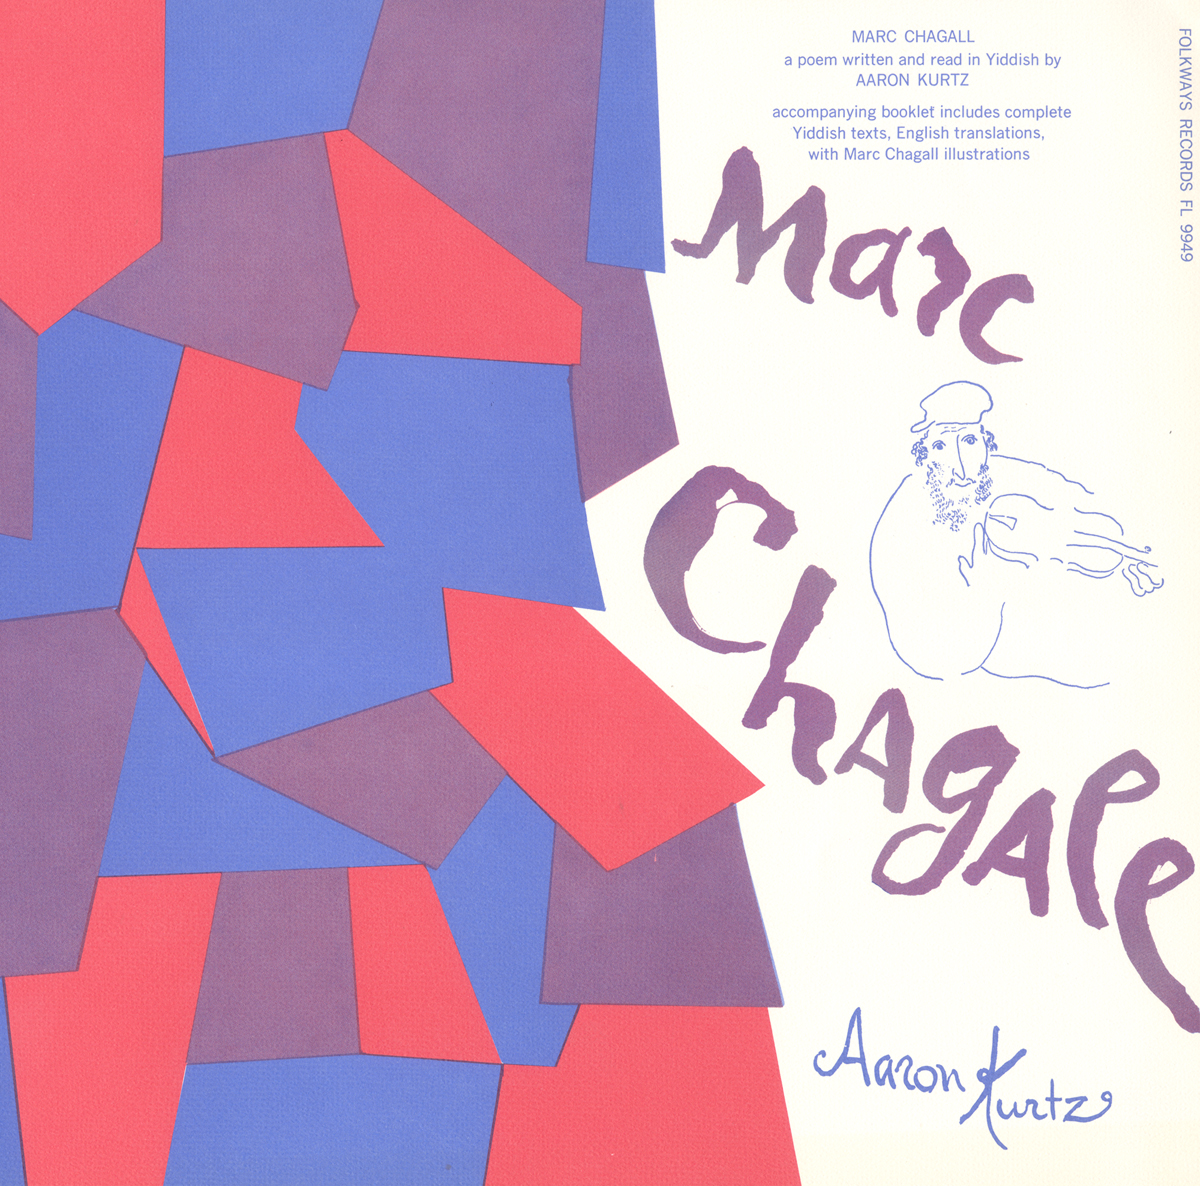 MARC CHAGALL: WRITTEN AND READ IN YIDDISH